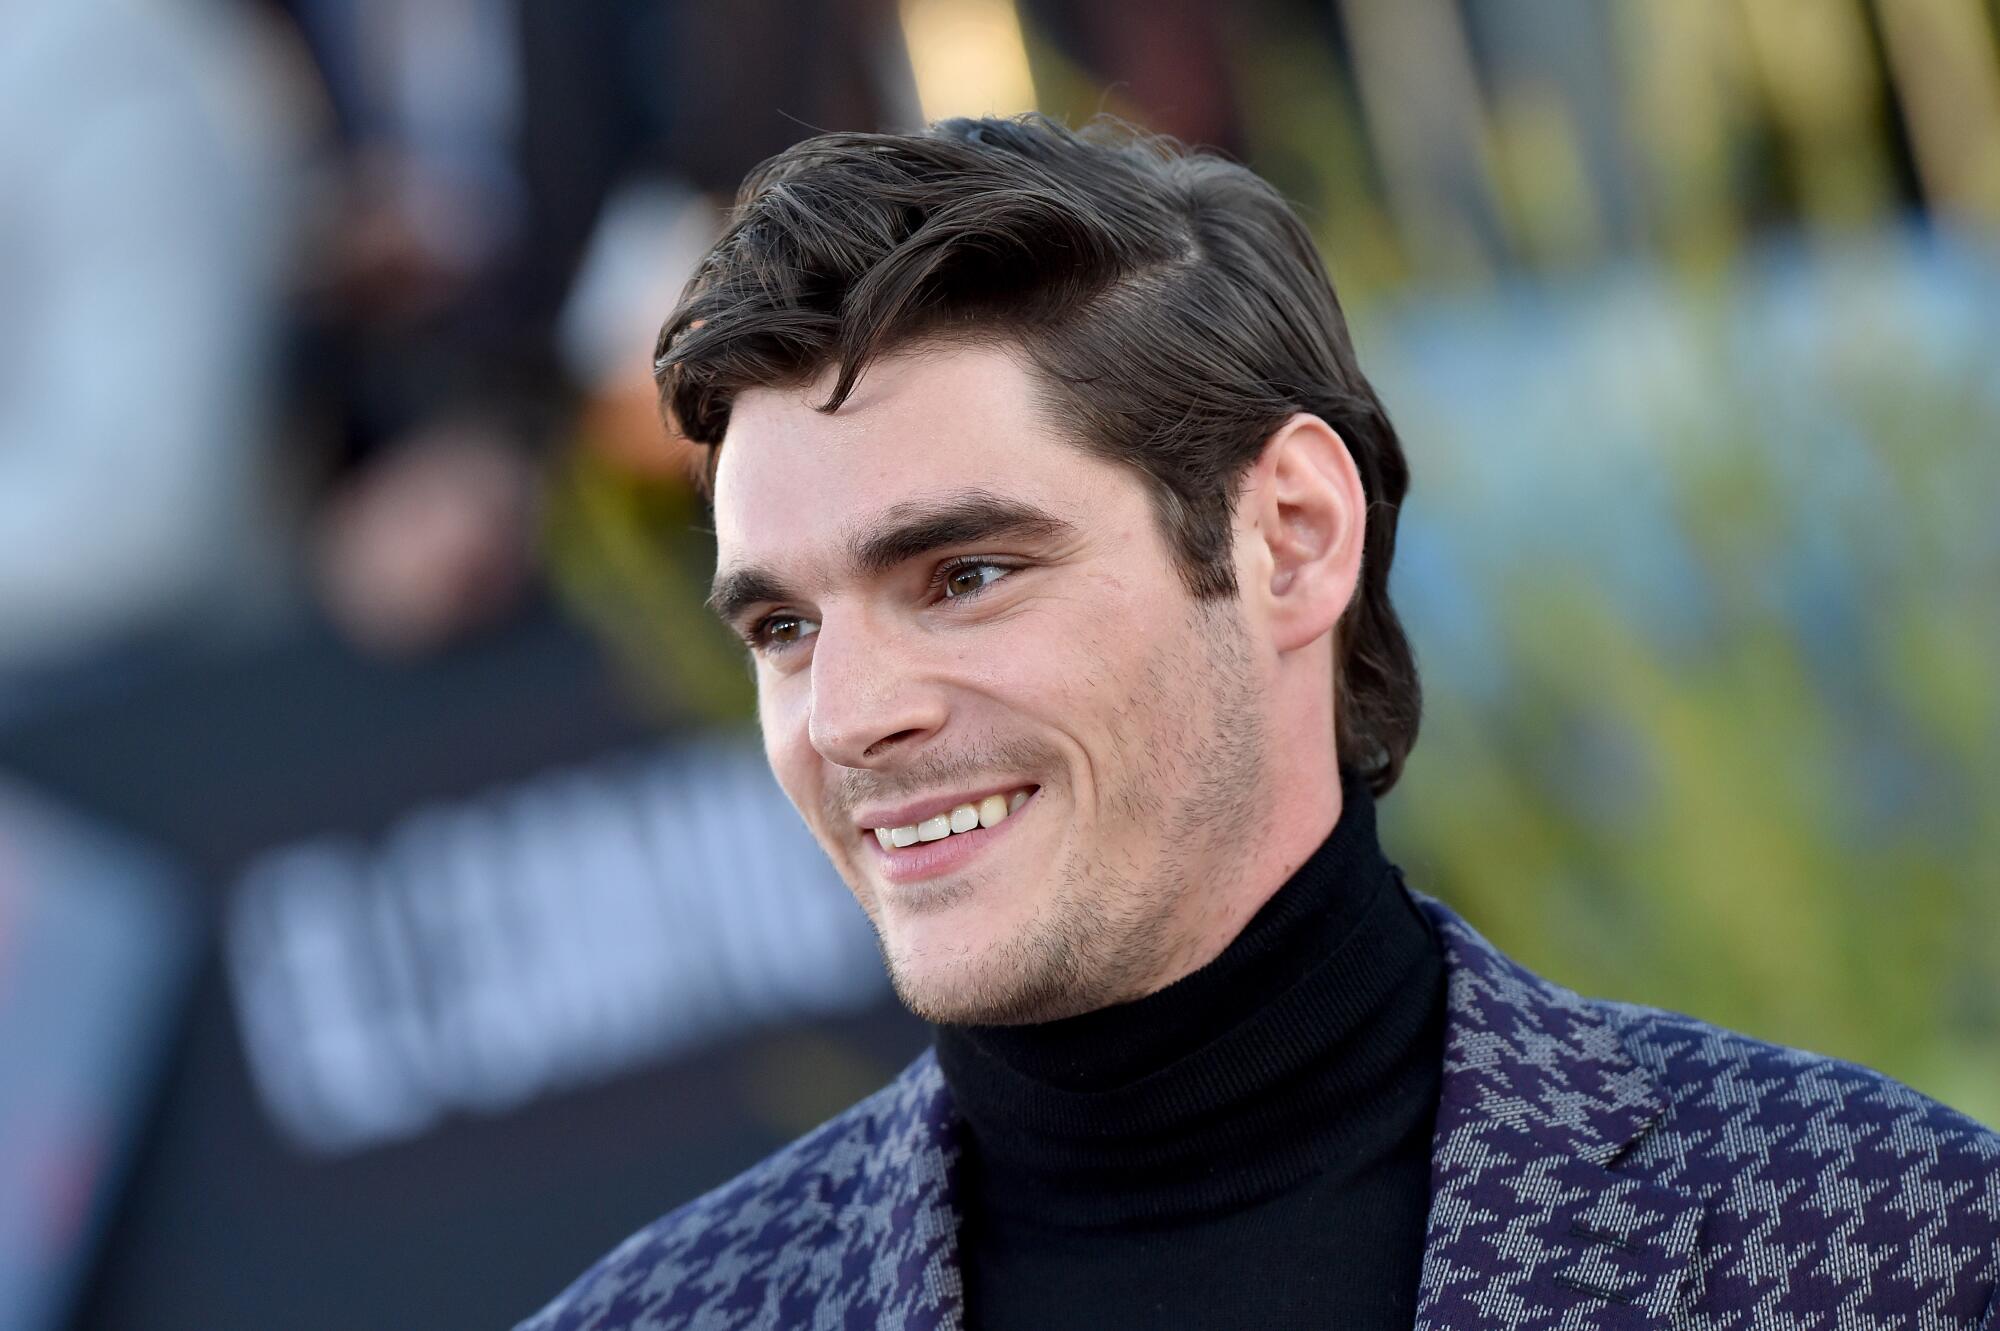 A head-and-shoulder frame of smiling RJ Mitte looking off to the left.